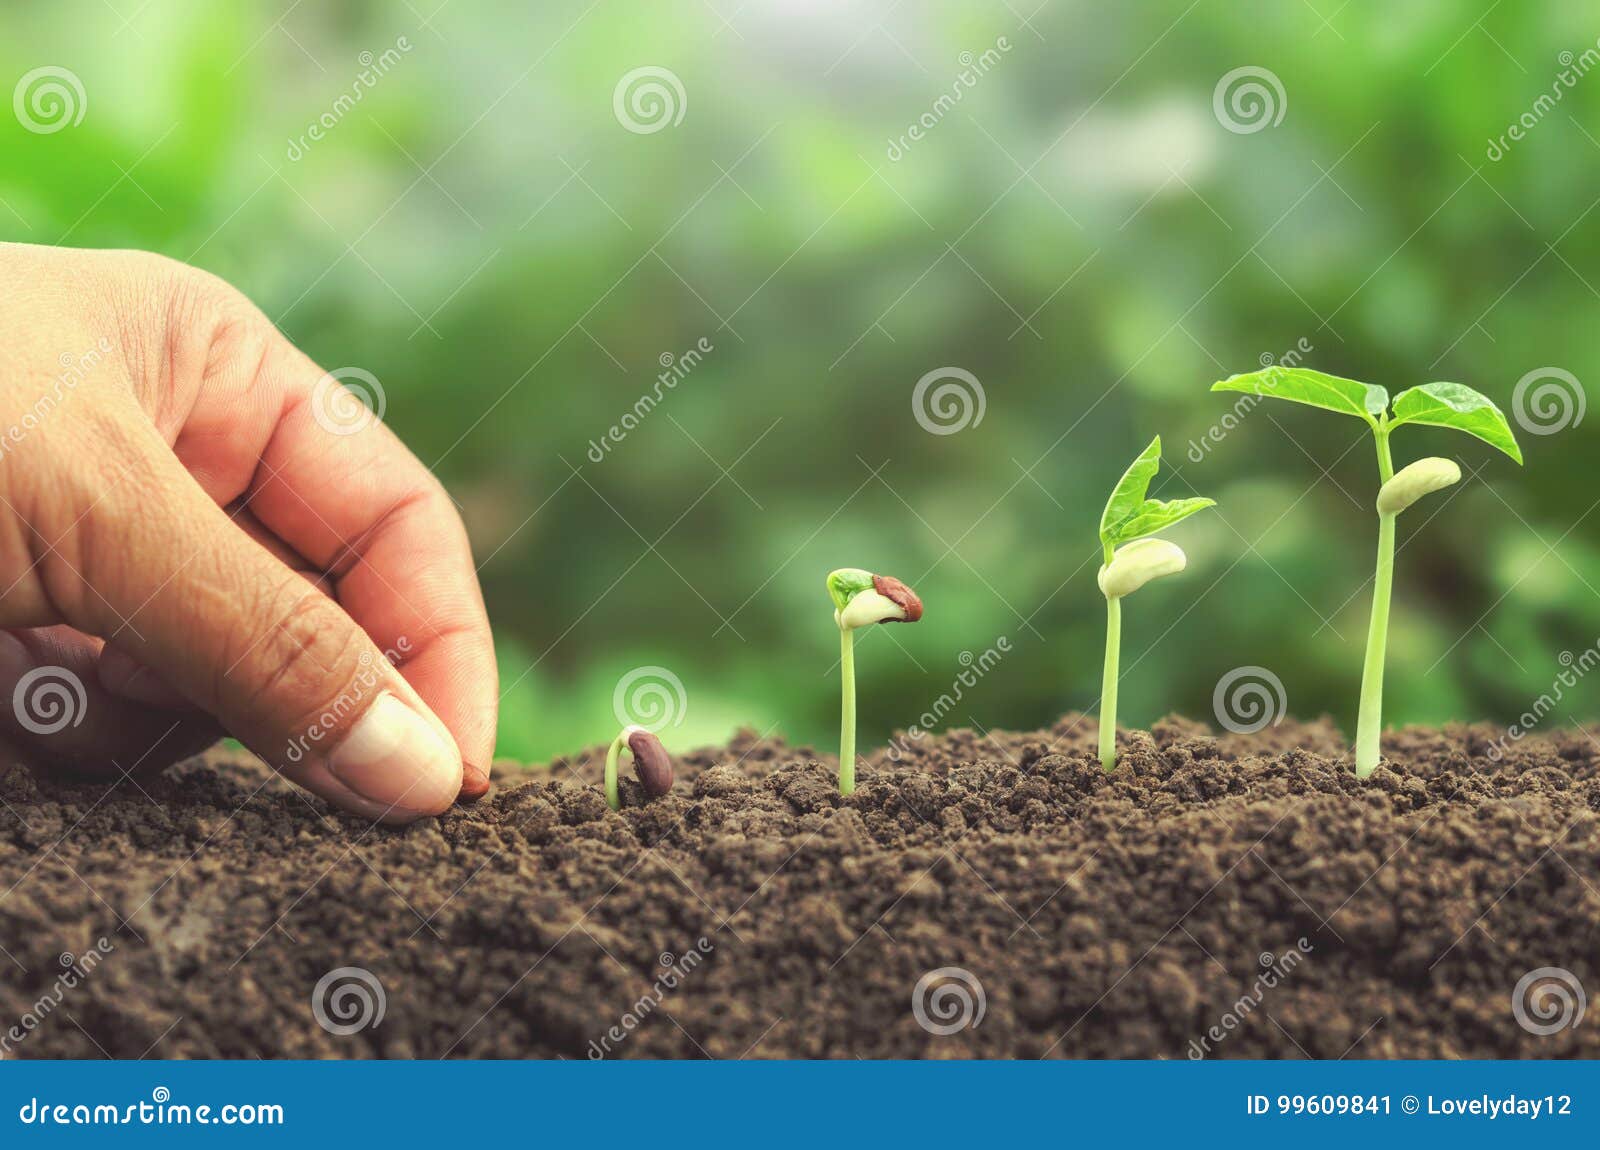 hand planting seed in soil plant growing step